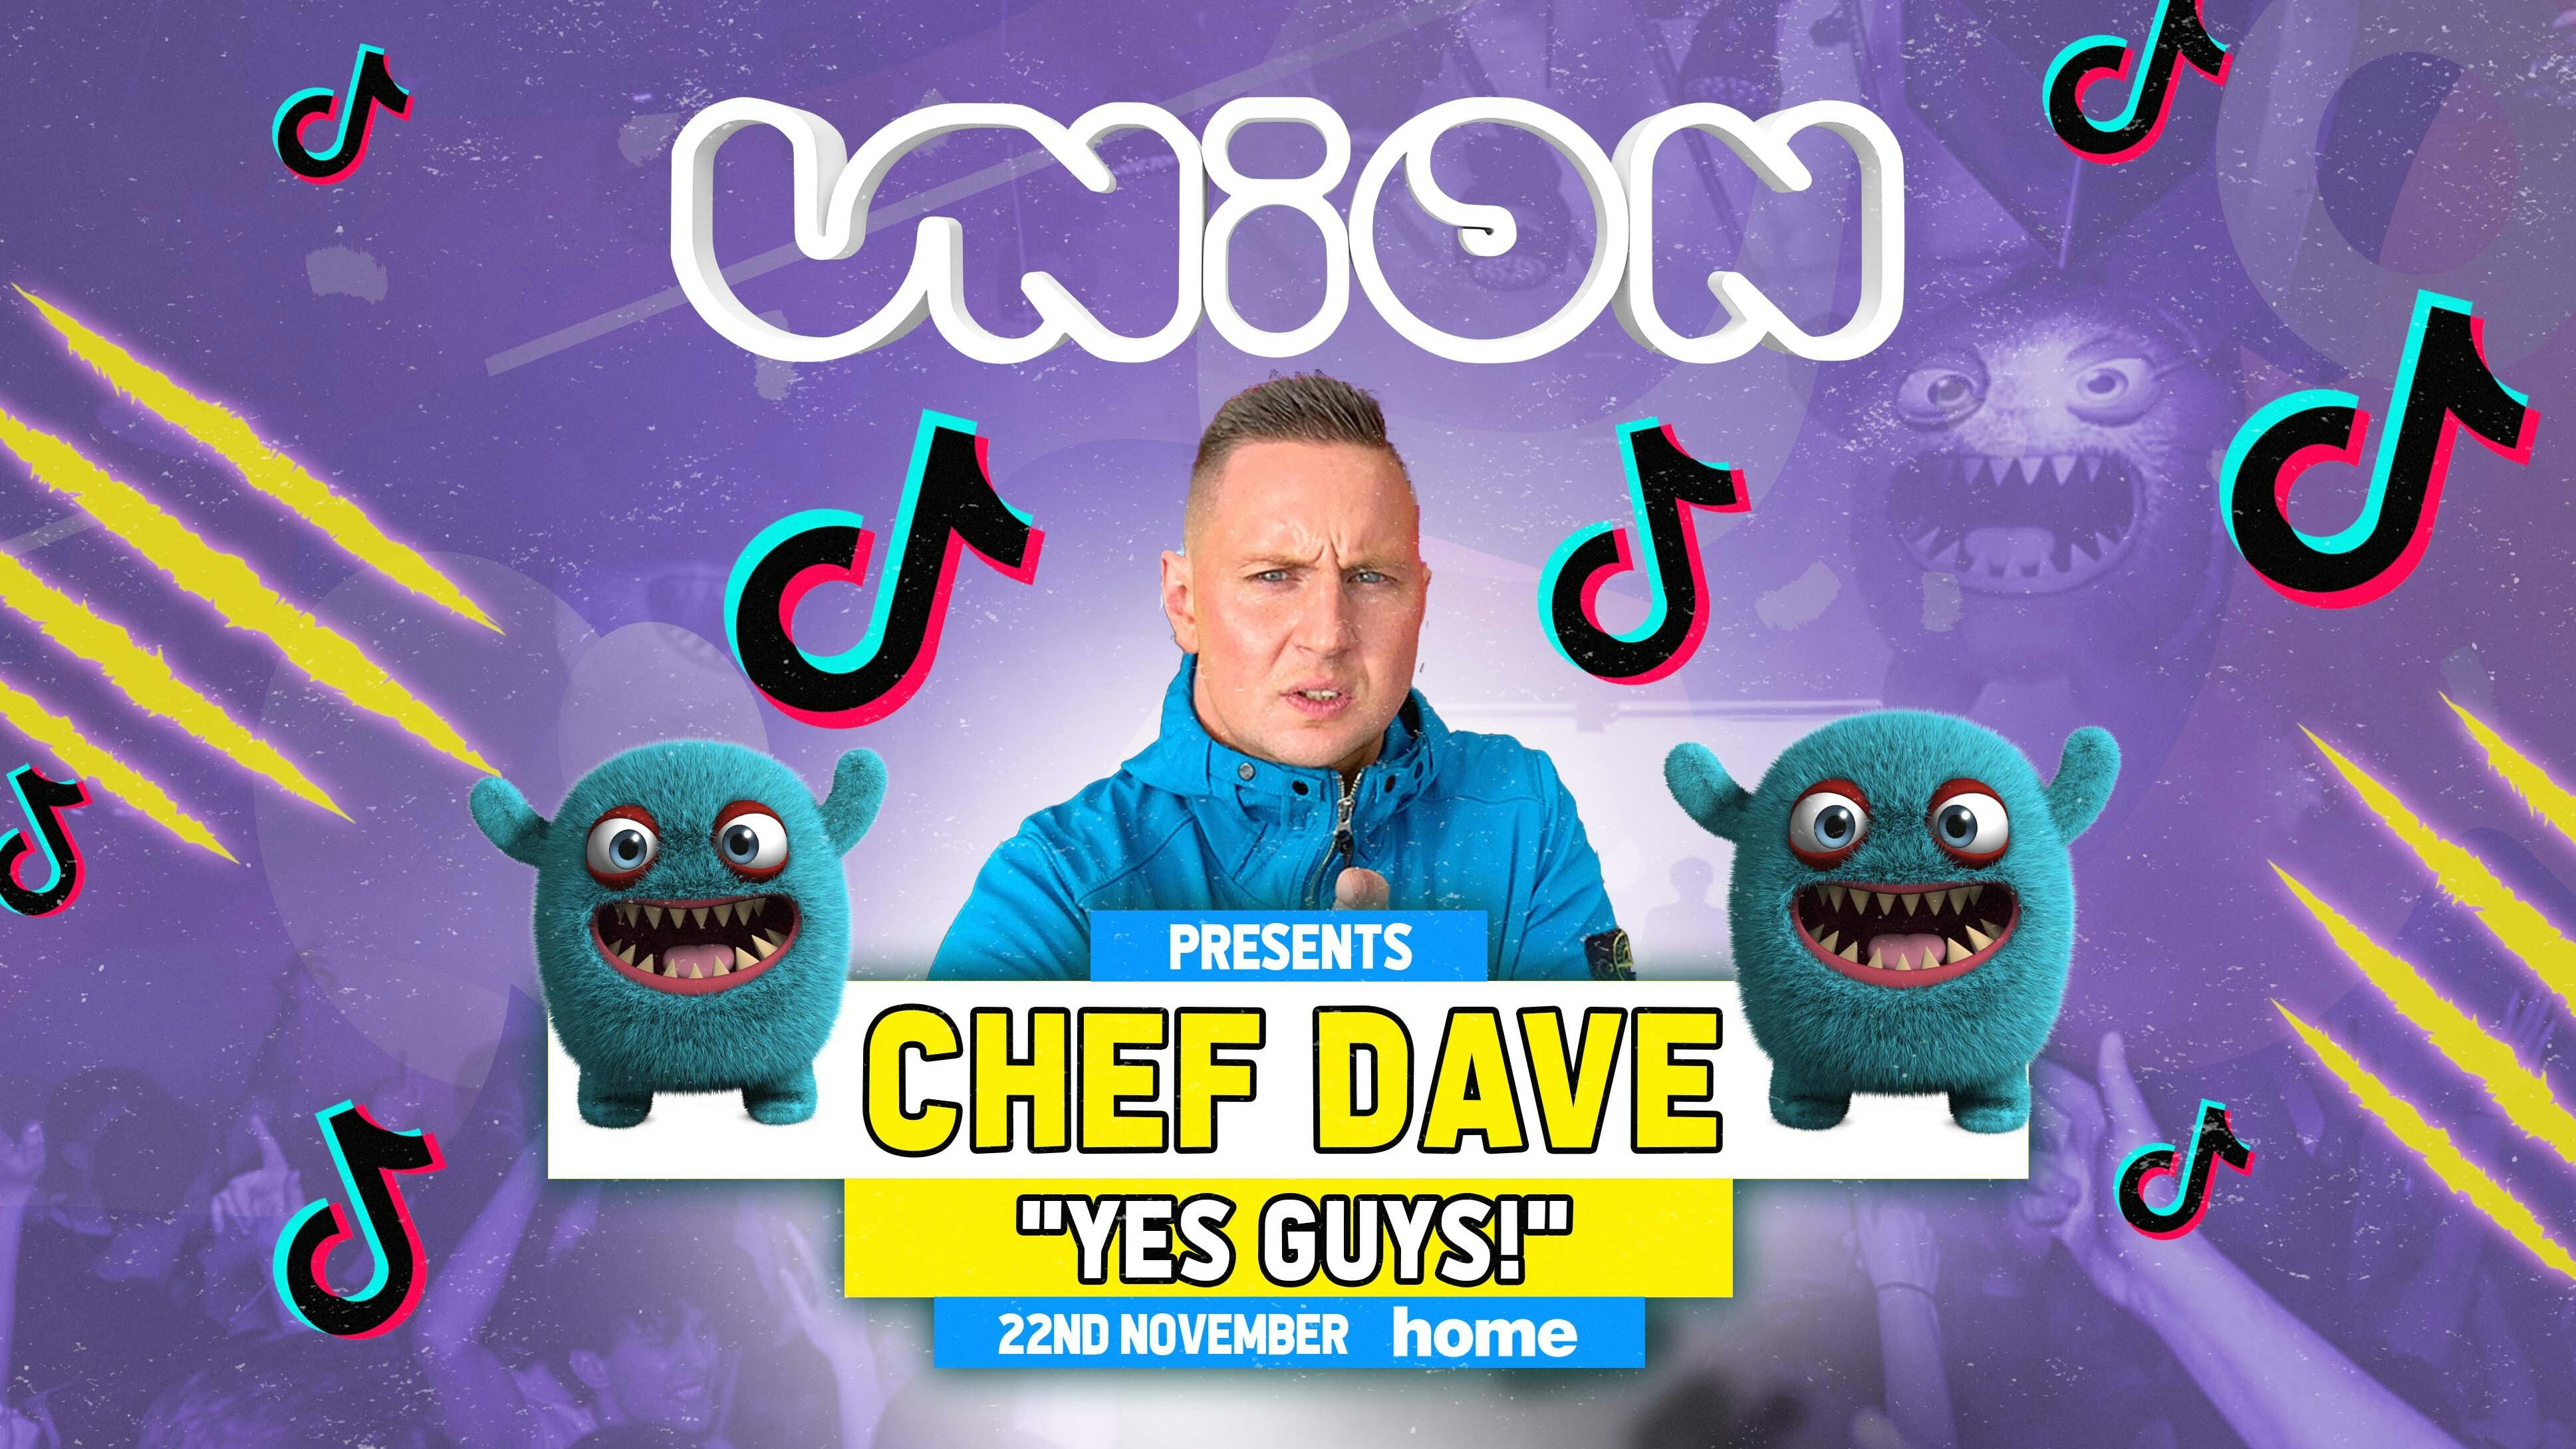 UNION TUESDAY’S PRESENTS CHEF DAVE